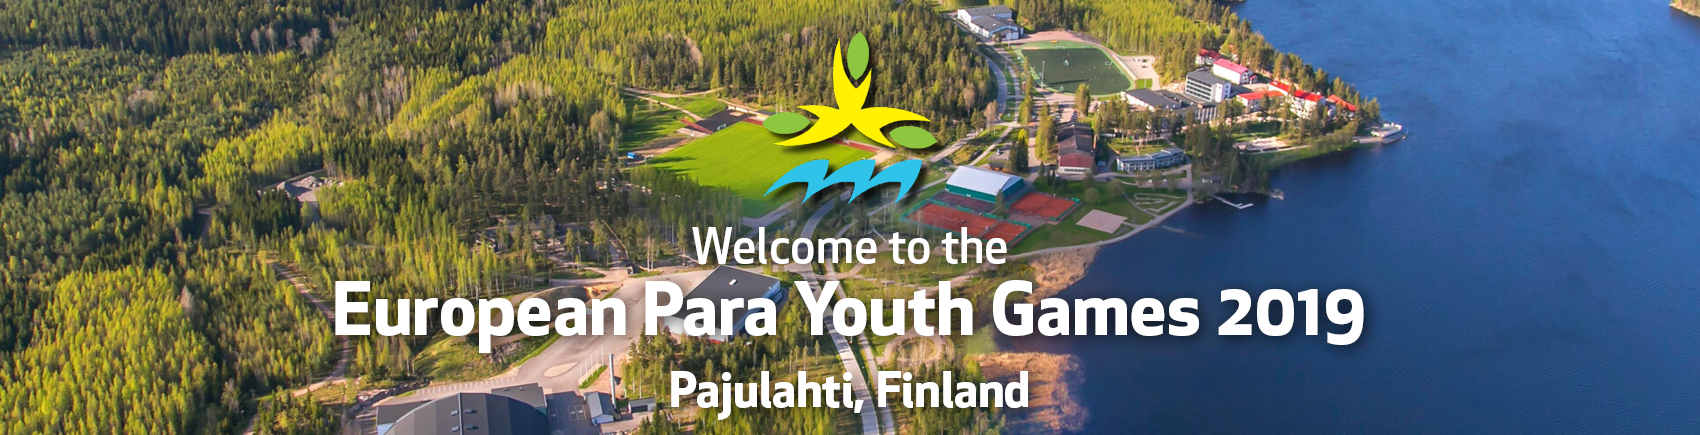 The European Para Youth Games have concluded in Pajulahti ©Twitter/epyg2019